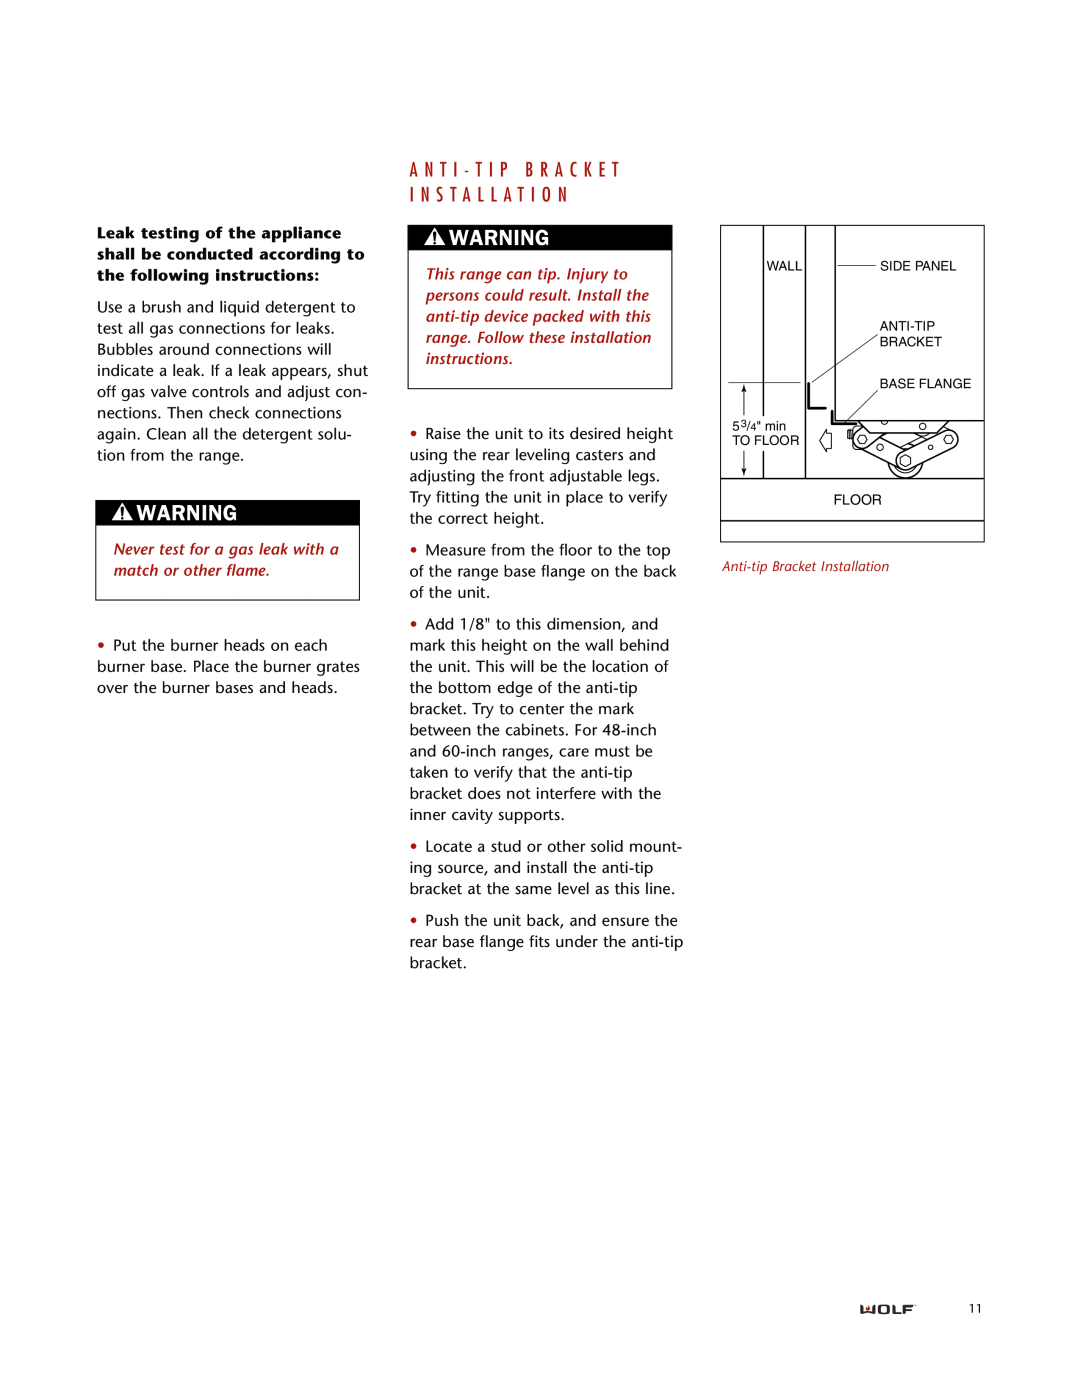 Wolf DUAL FUEL RANGES installation instructions Never test for a gas leak with a match or other flame 